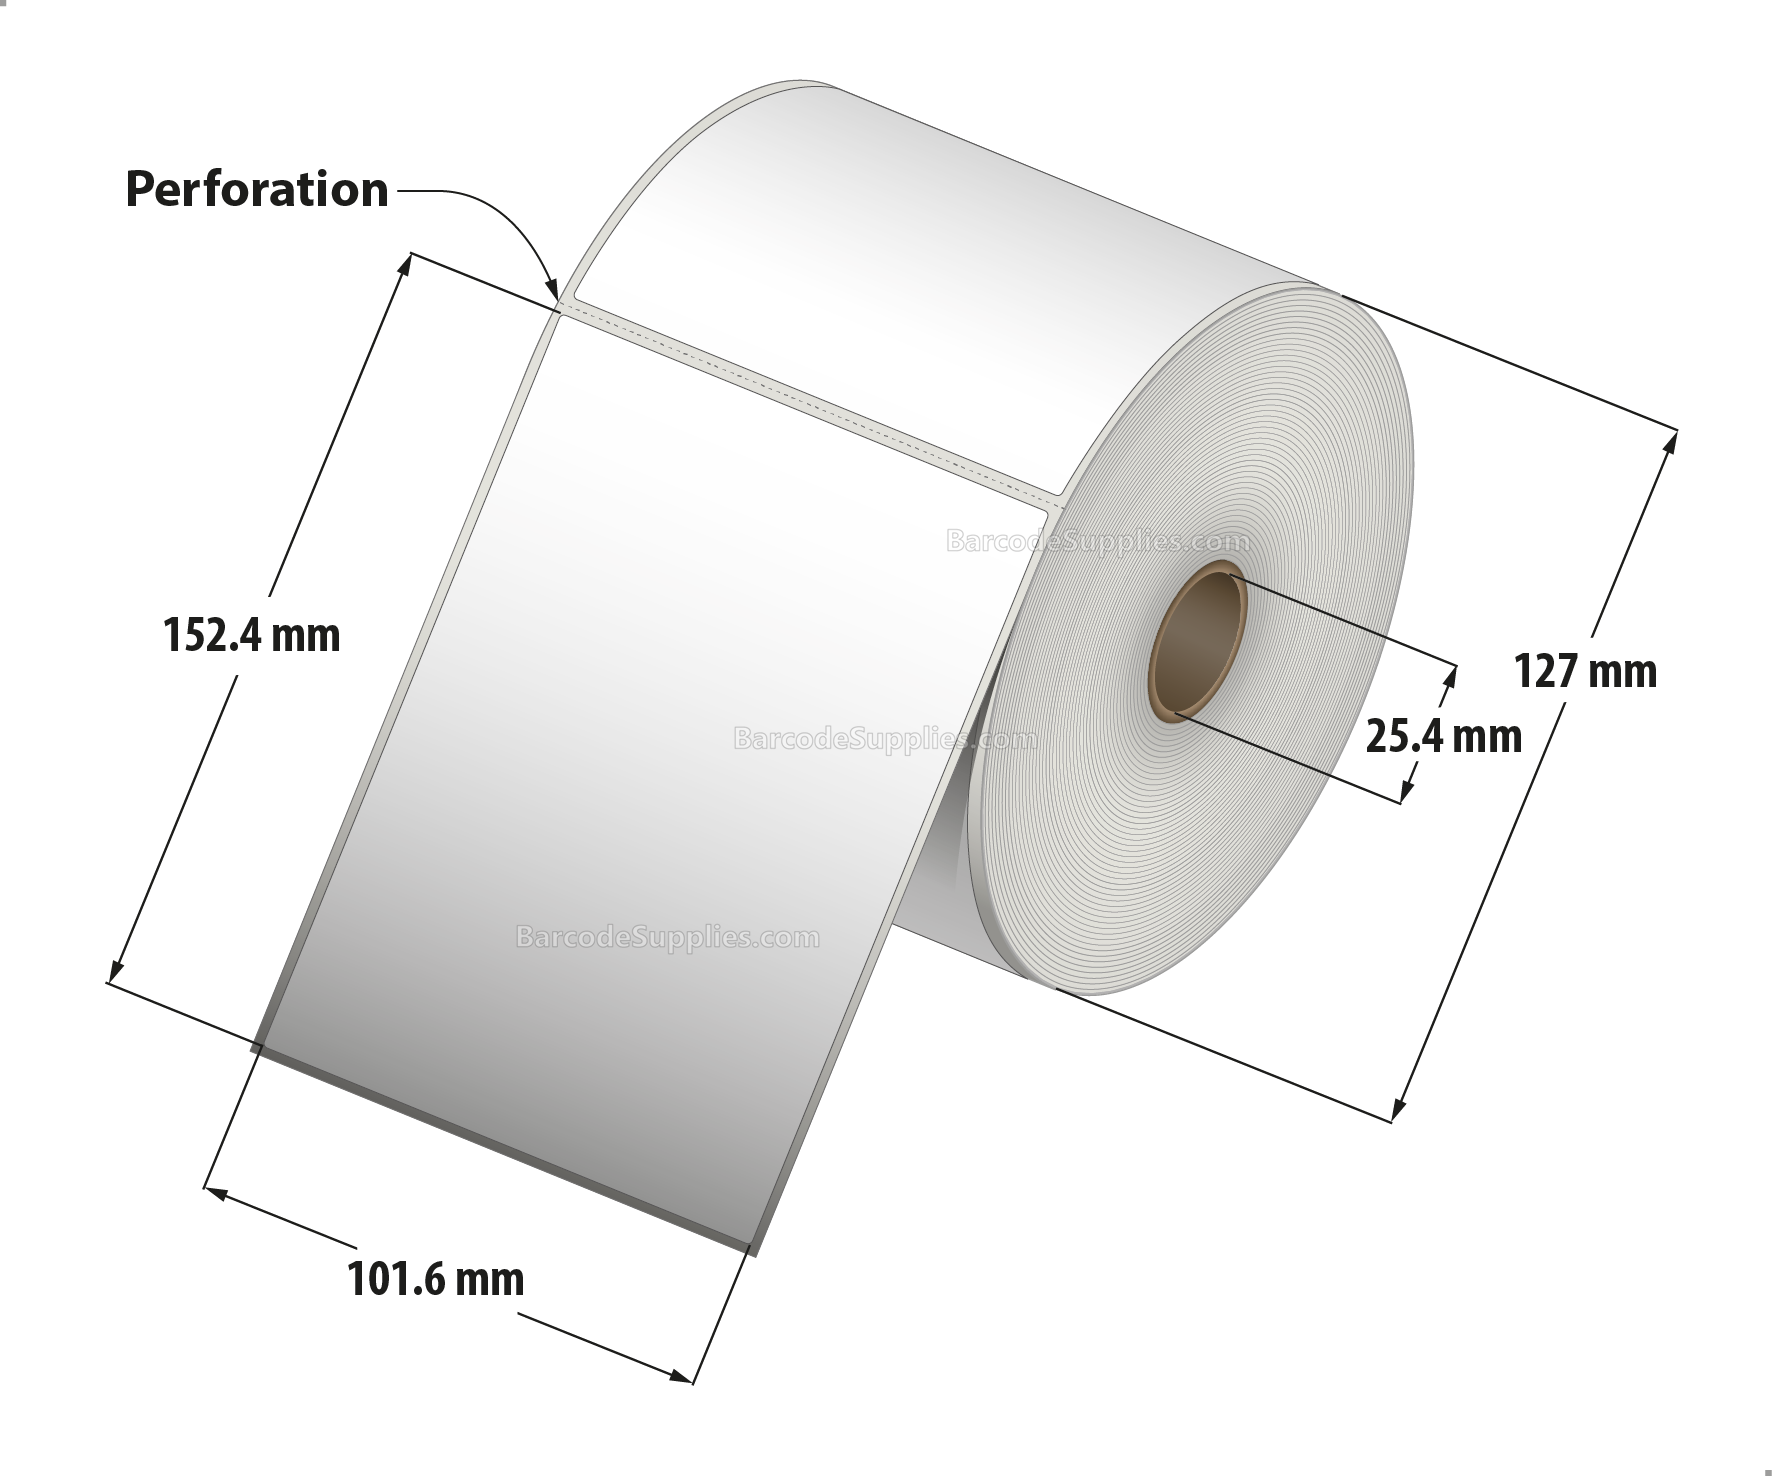 4 x 6 Thermal Transfer White Labels With Permanent Acrylic Adhesive - Perforated - 450 Labels Per Roll - Carton Of 4 Rolls - 1800 Labels Total - MPN: TH46-15PTT